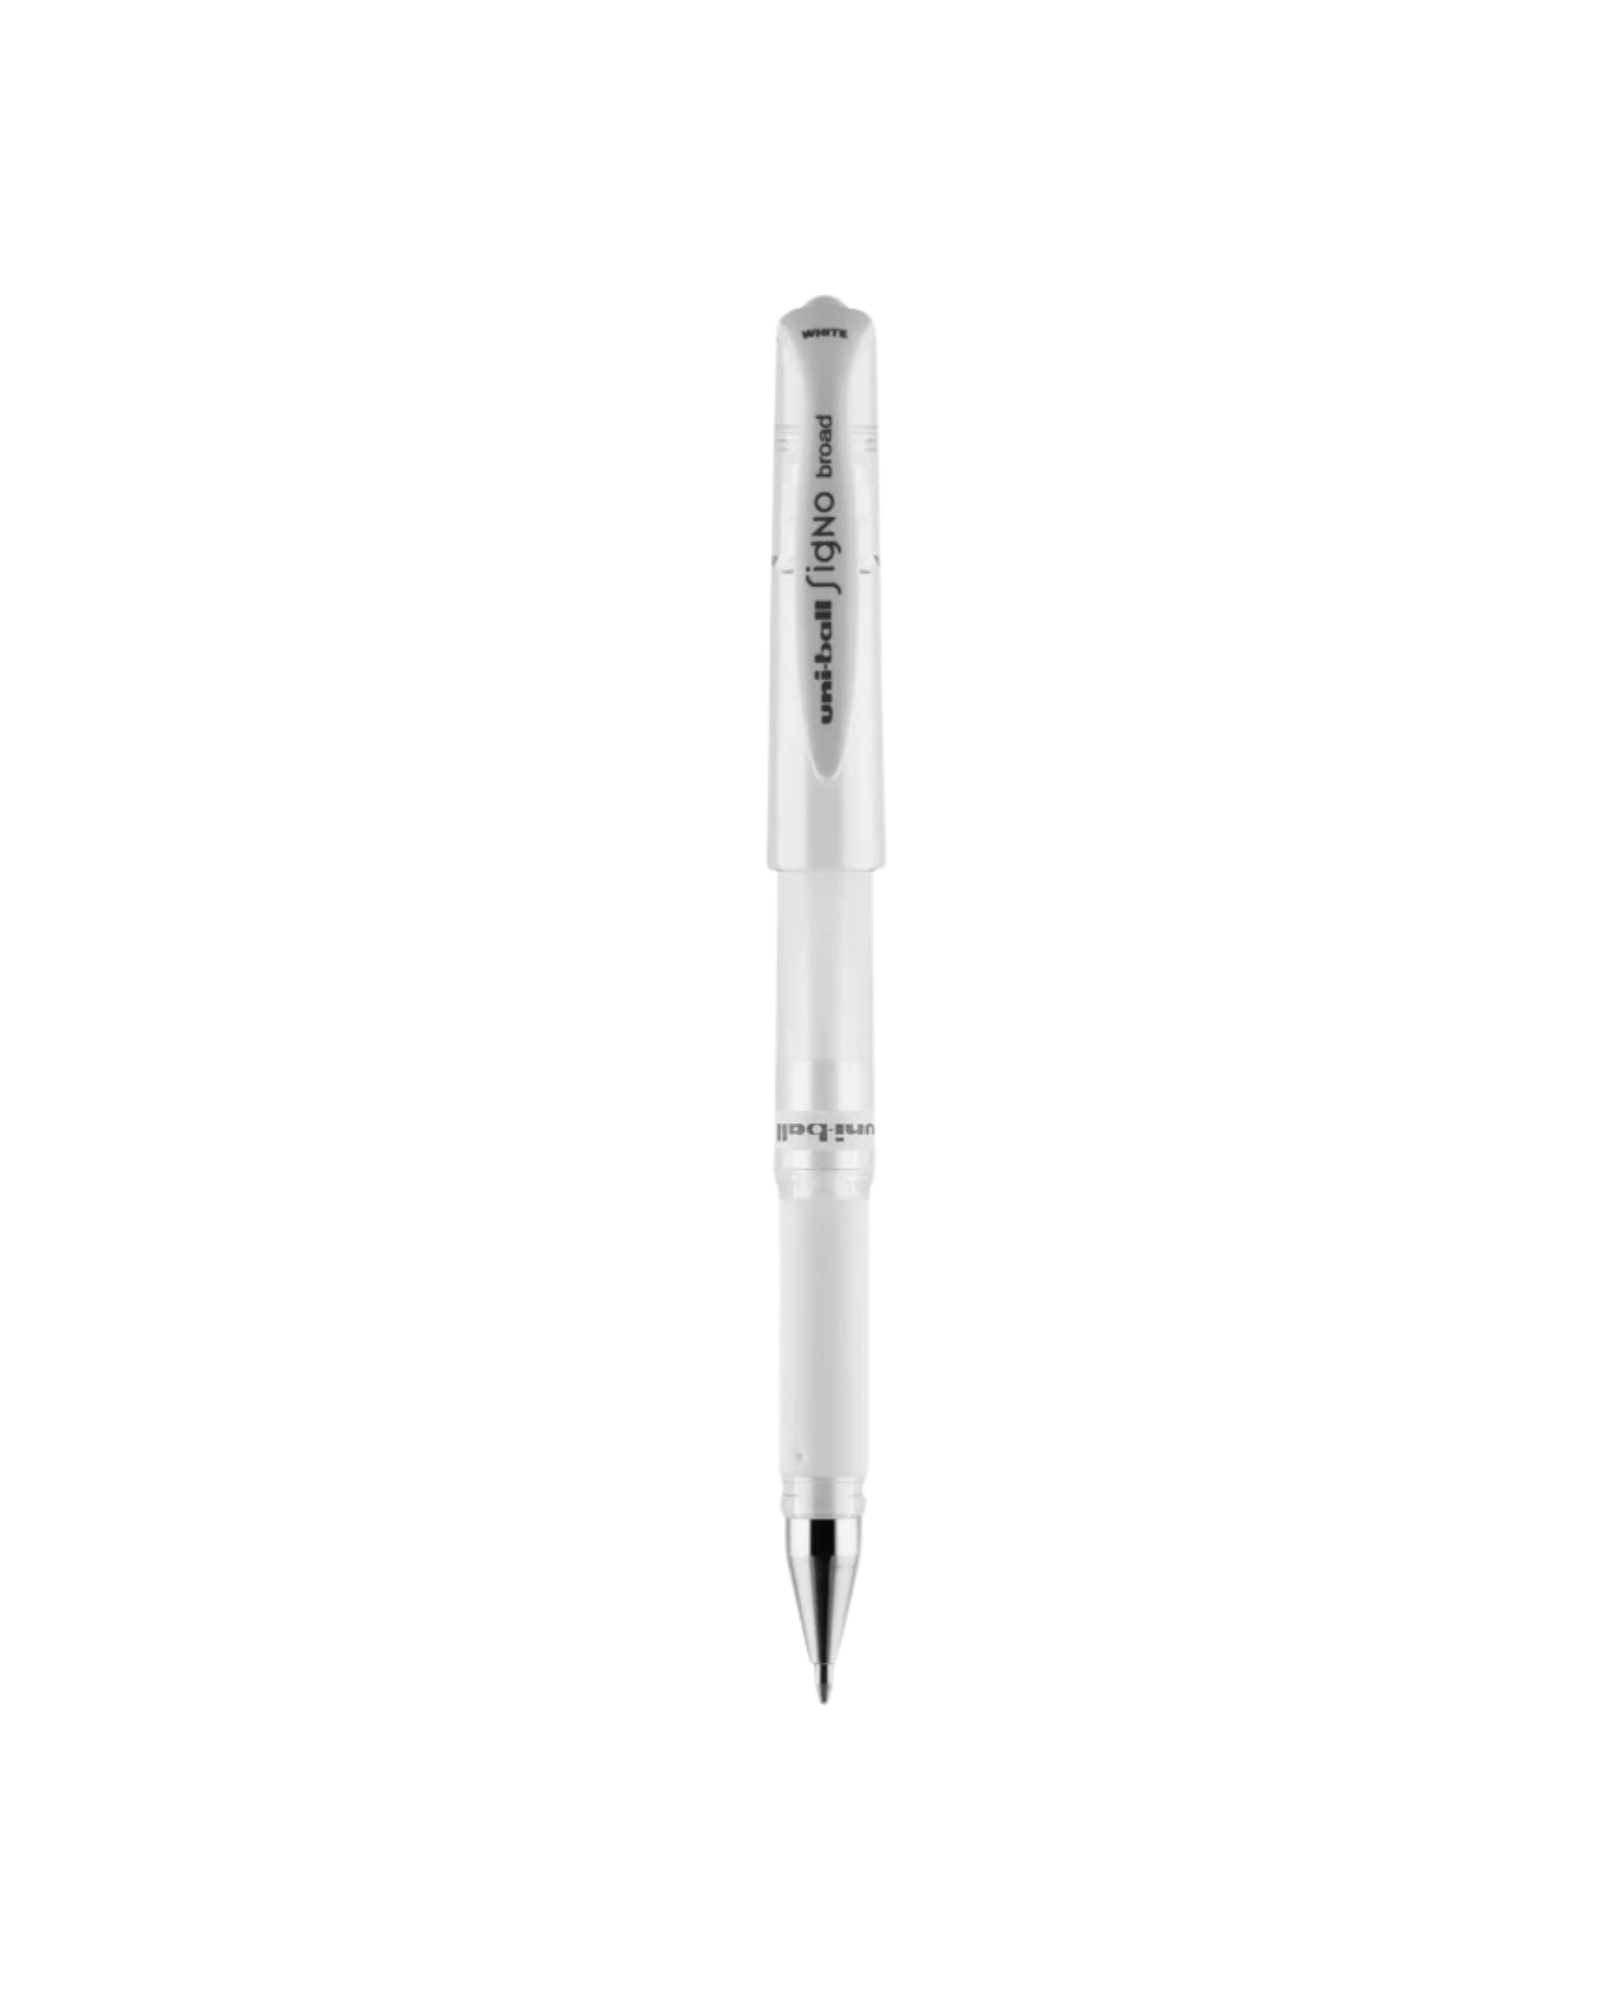 Find the Uni-Ball White Signo Broad Gel Impact Pen at Michaels